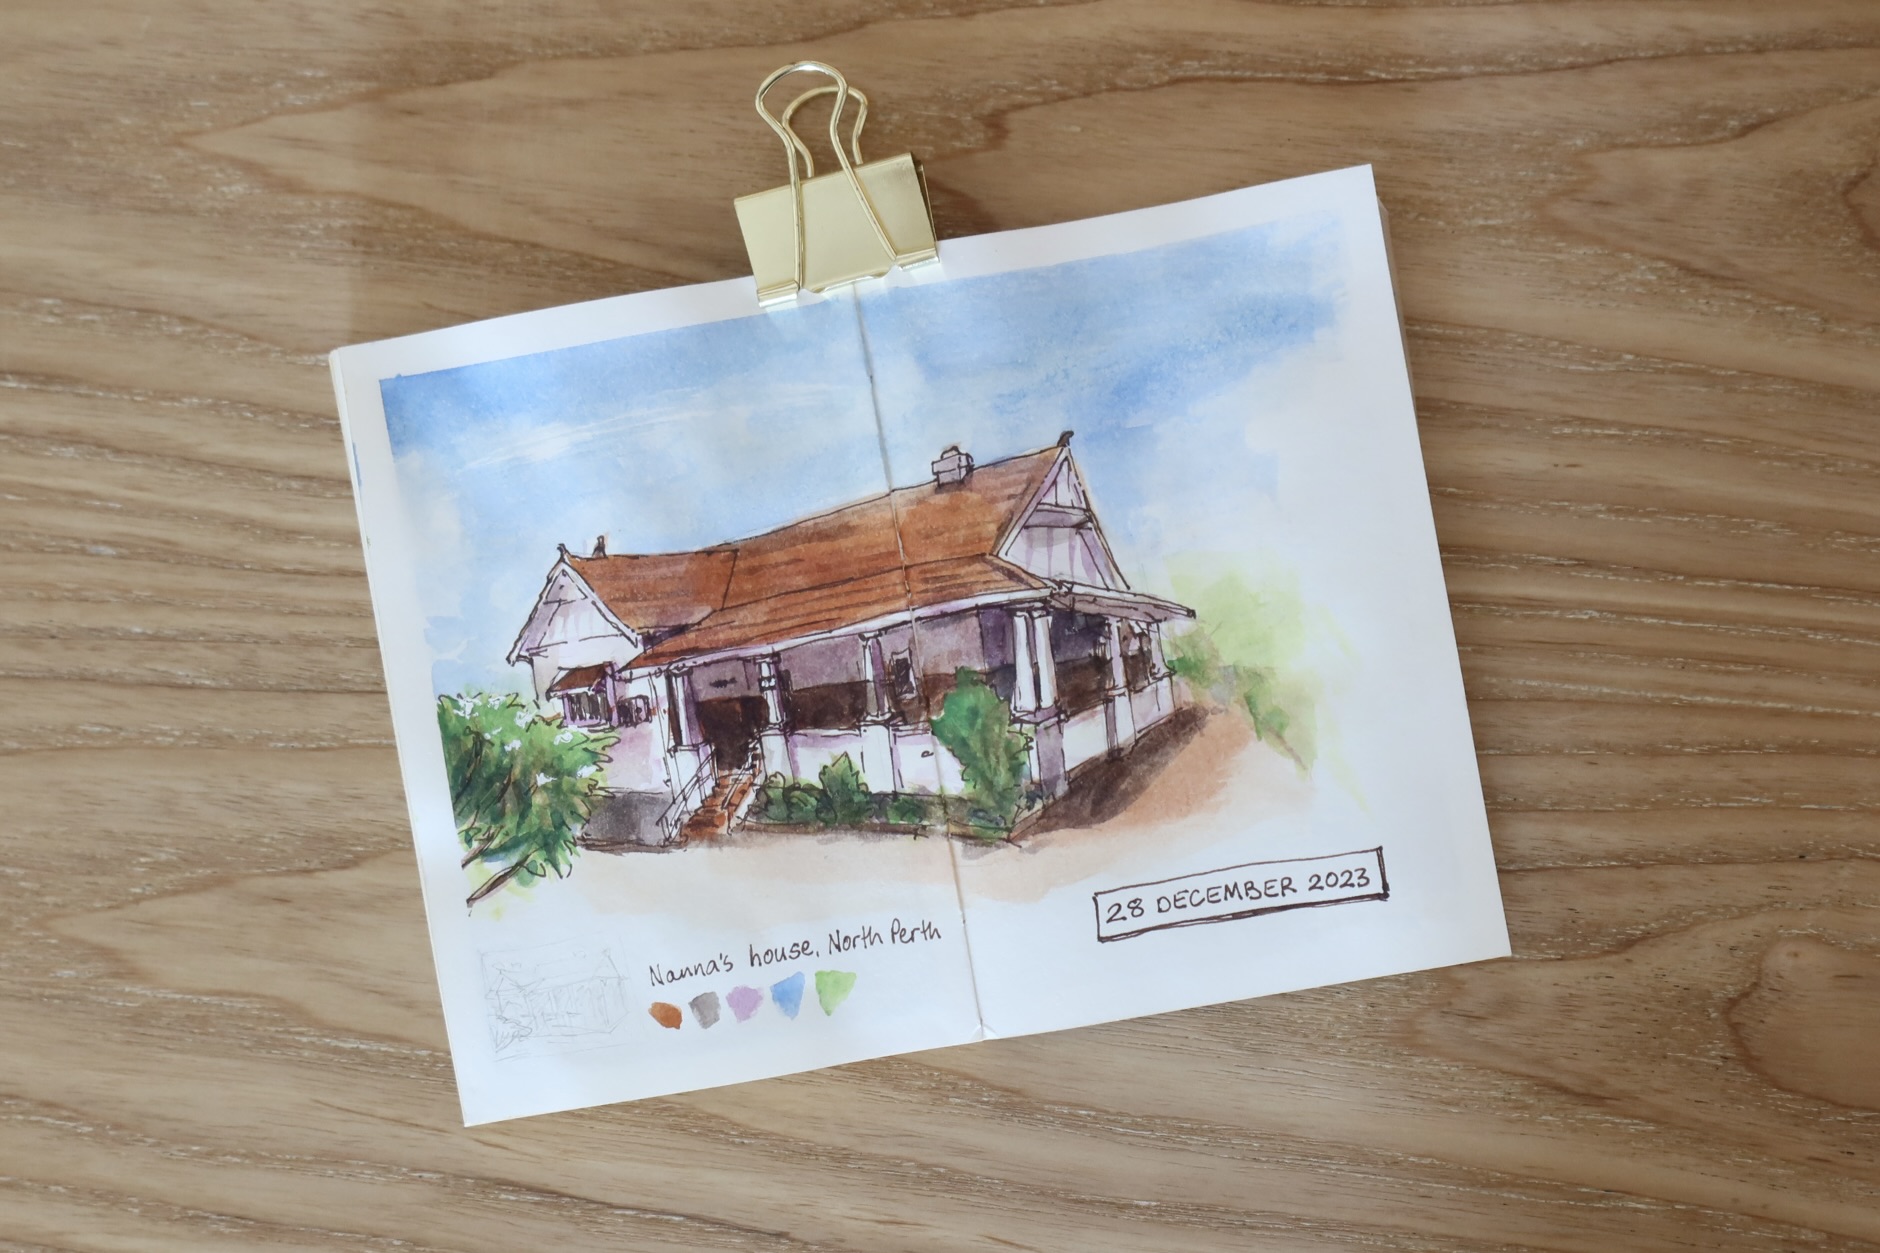 IMG_4737.jpeg|watercolour sketch of an old house